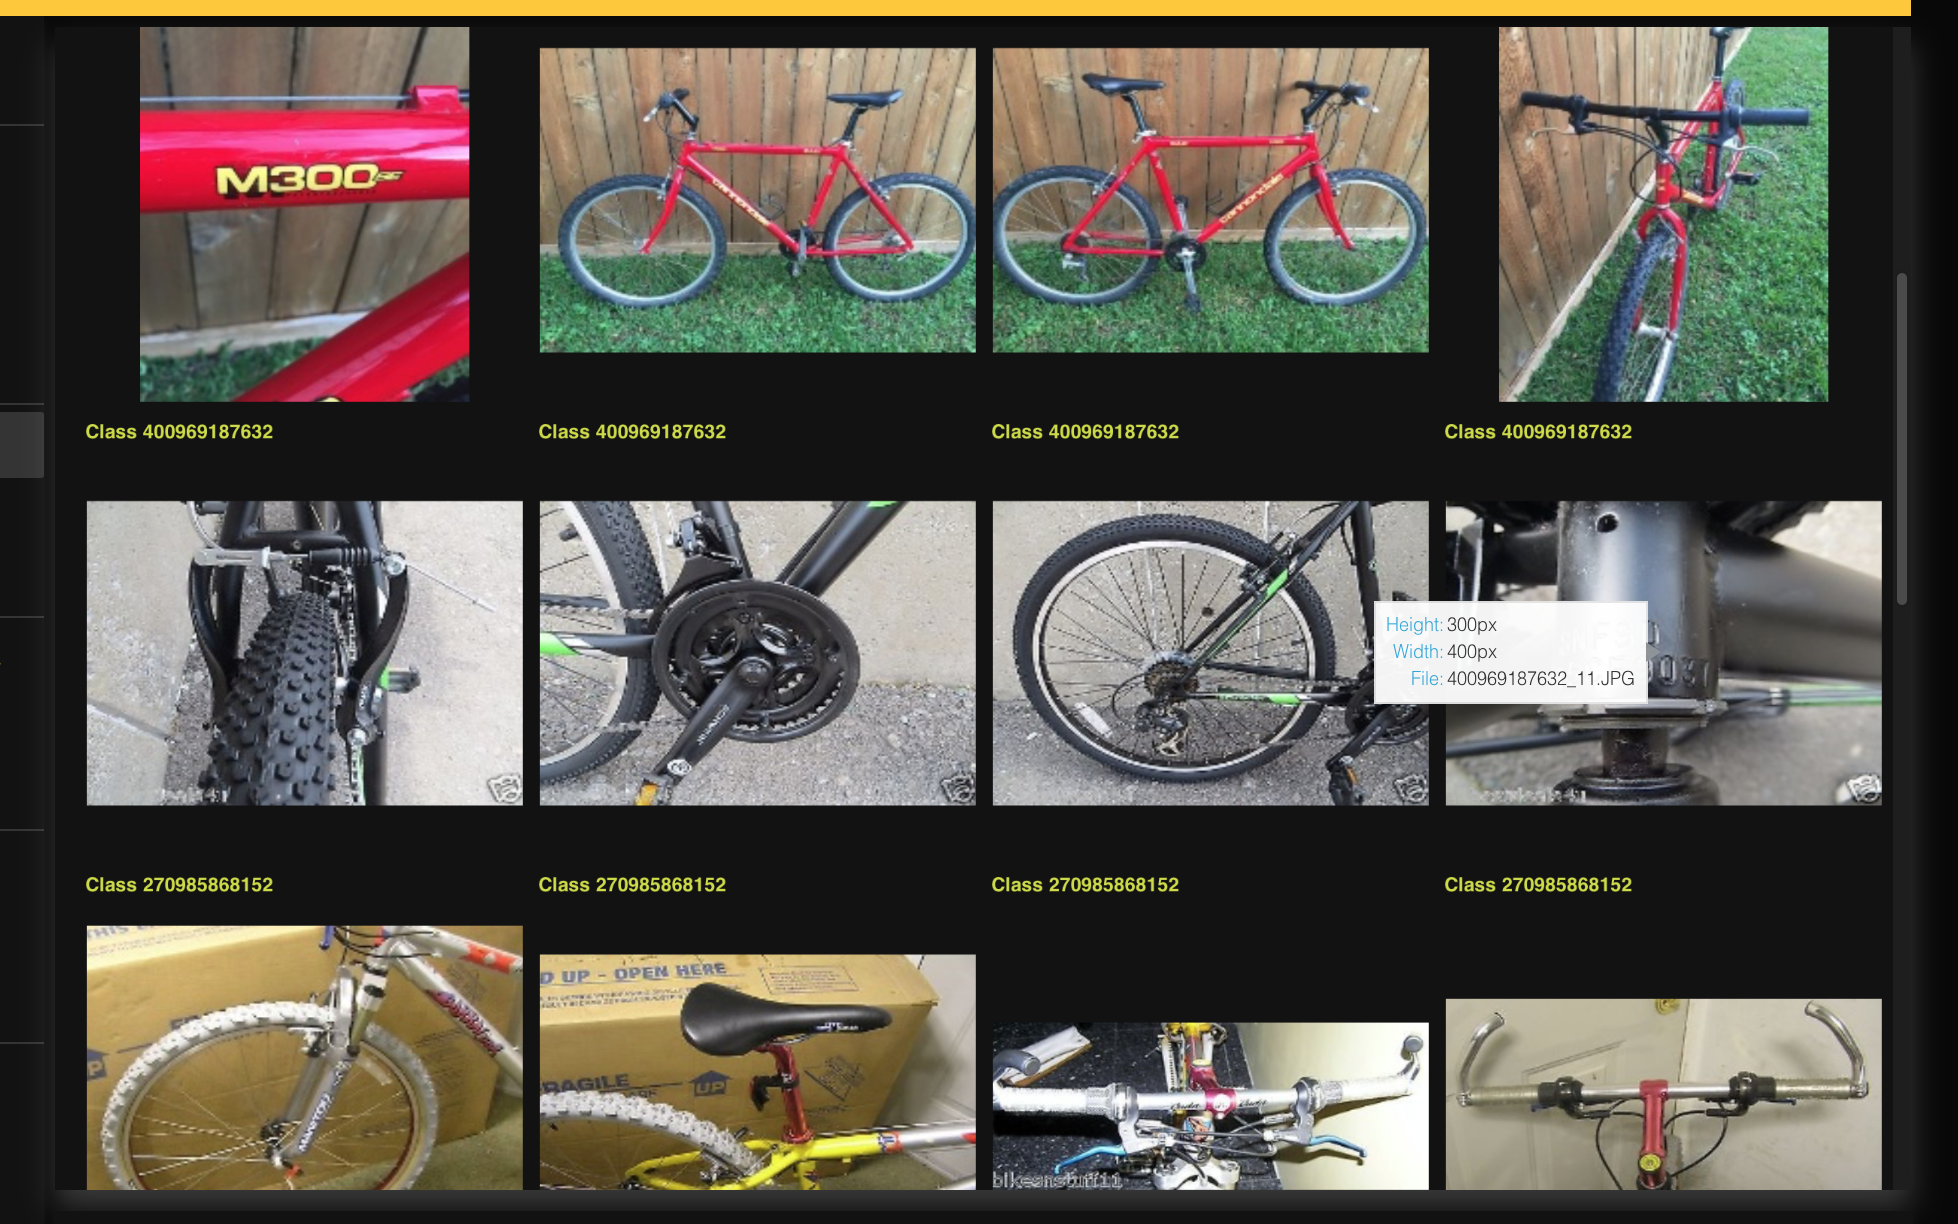 Sample train visualization tab displaying images from the bicycle_image_metric_learning dataset